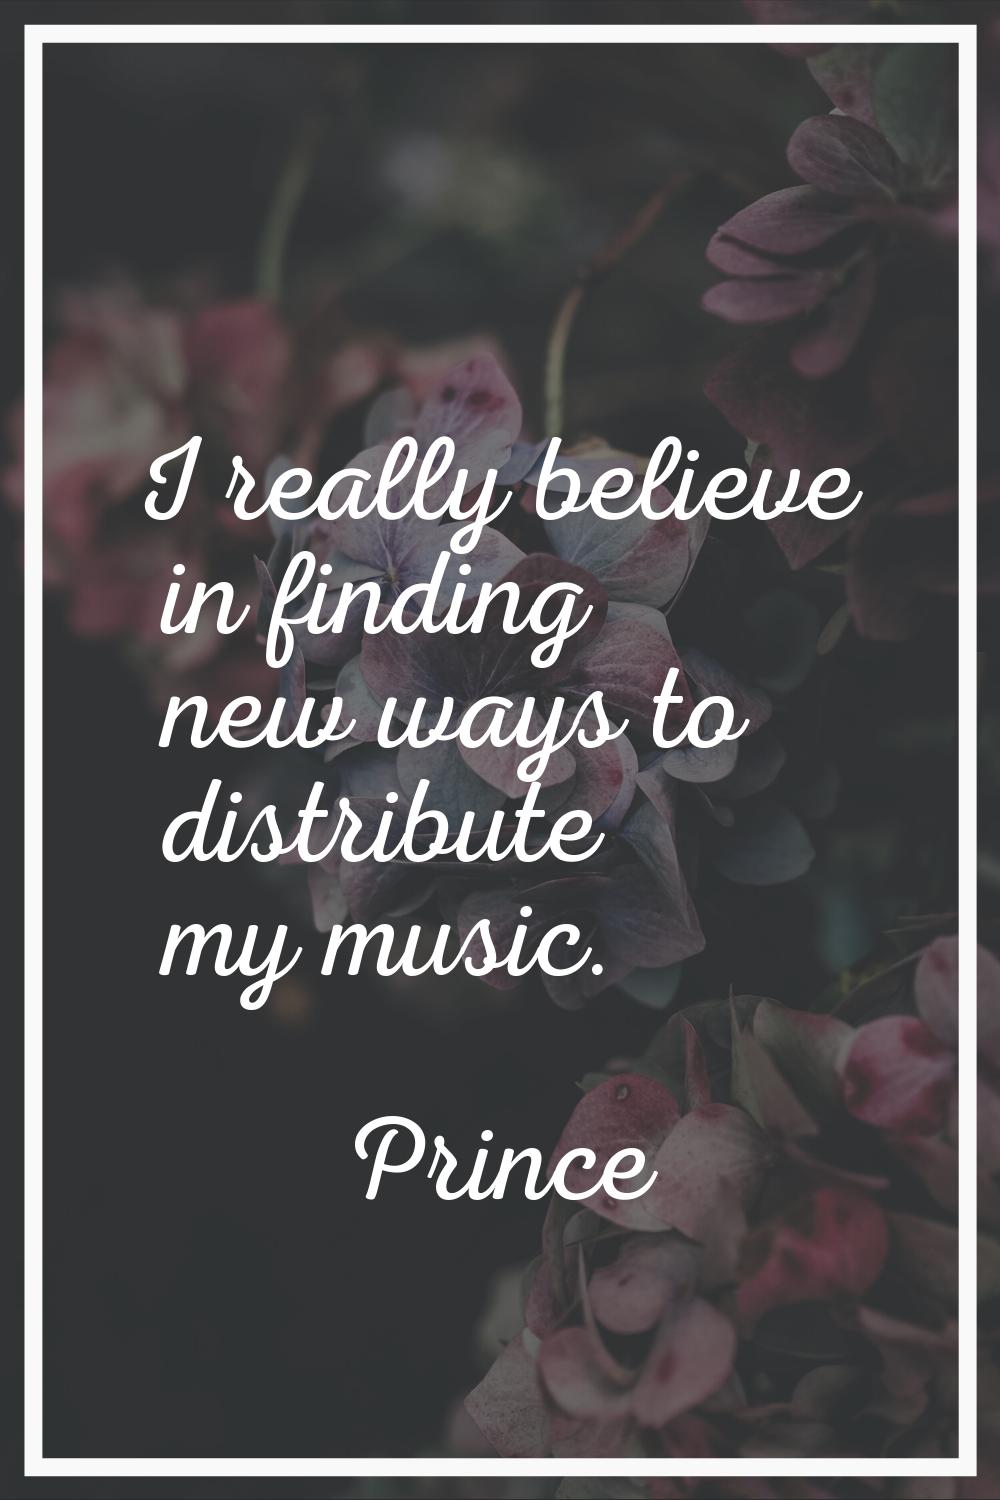 I really believe in finding new ways to distribute my music.